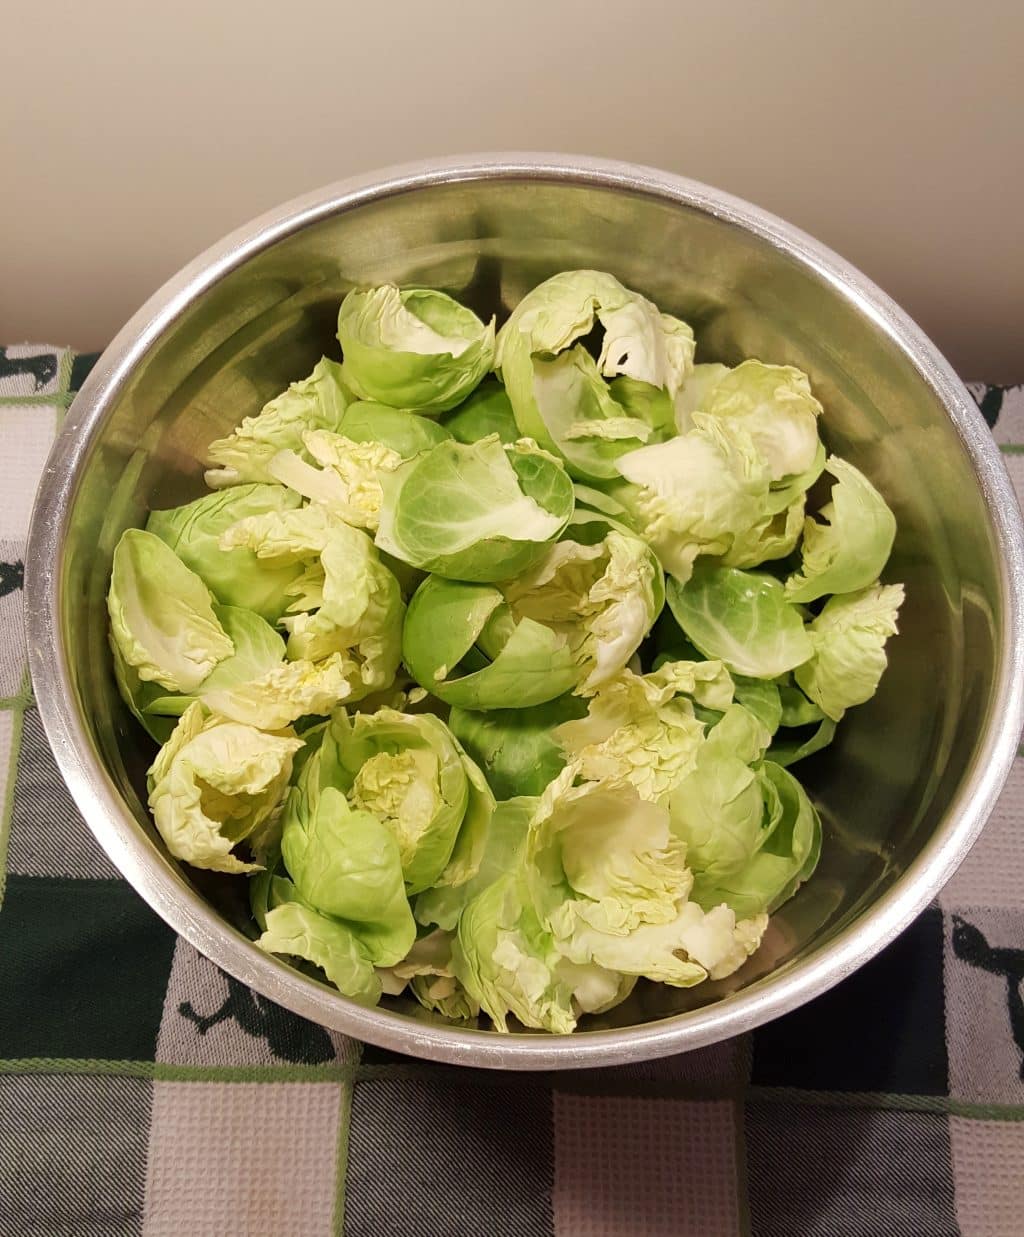 Place the Brussels Sprouts Leaves in a Bowl